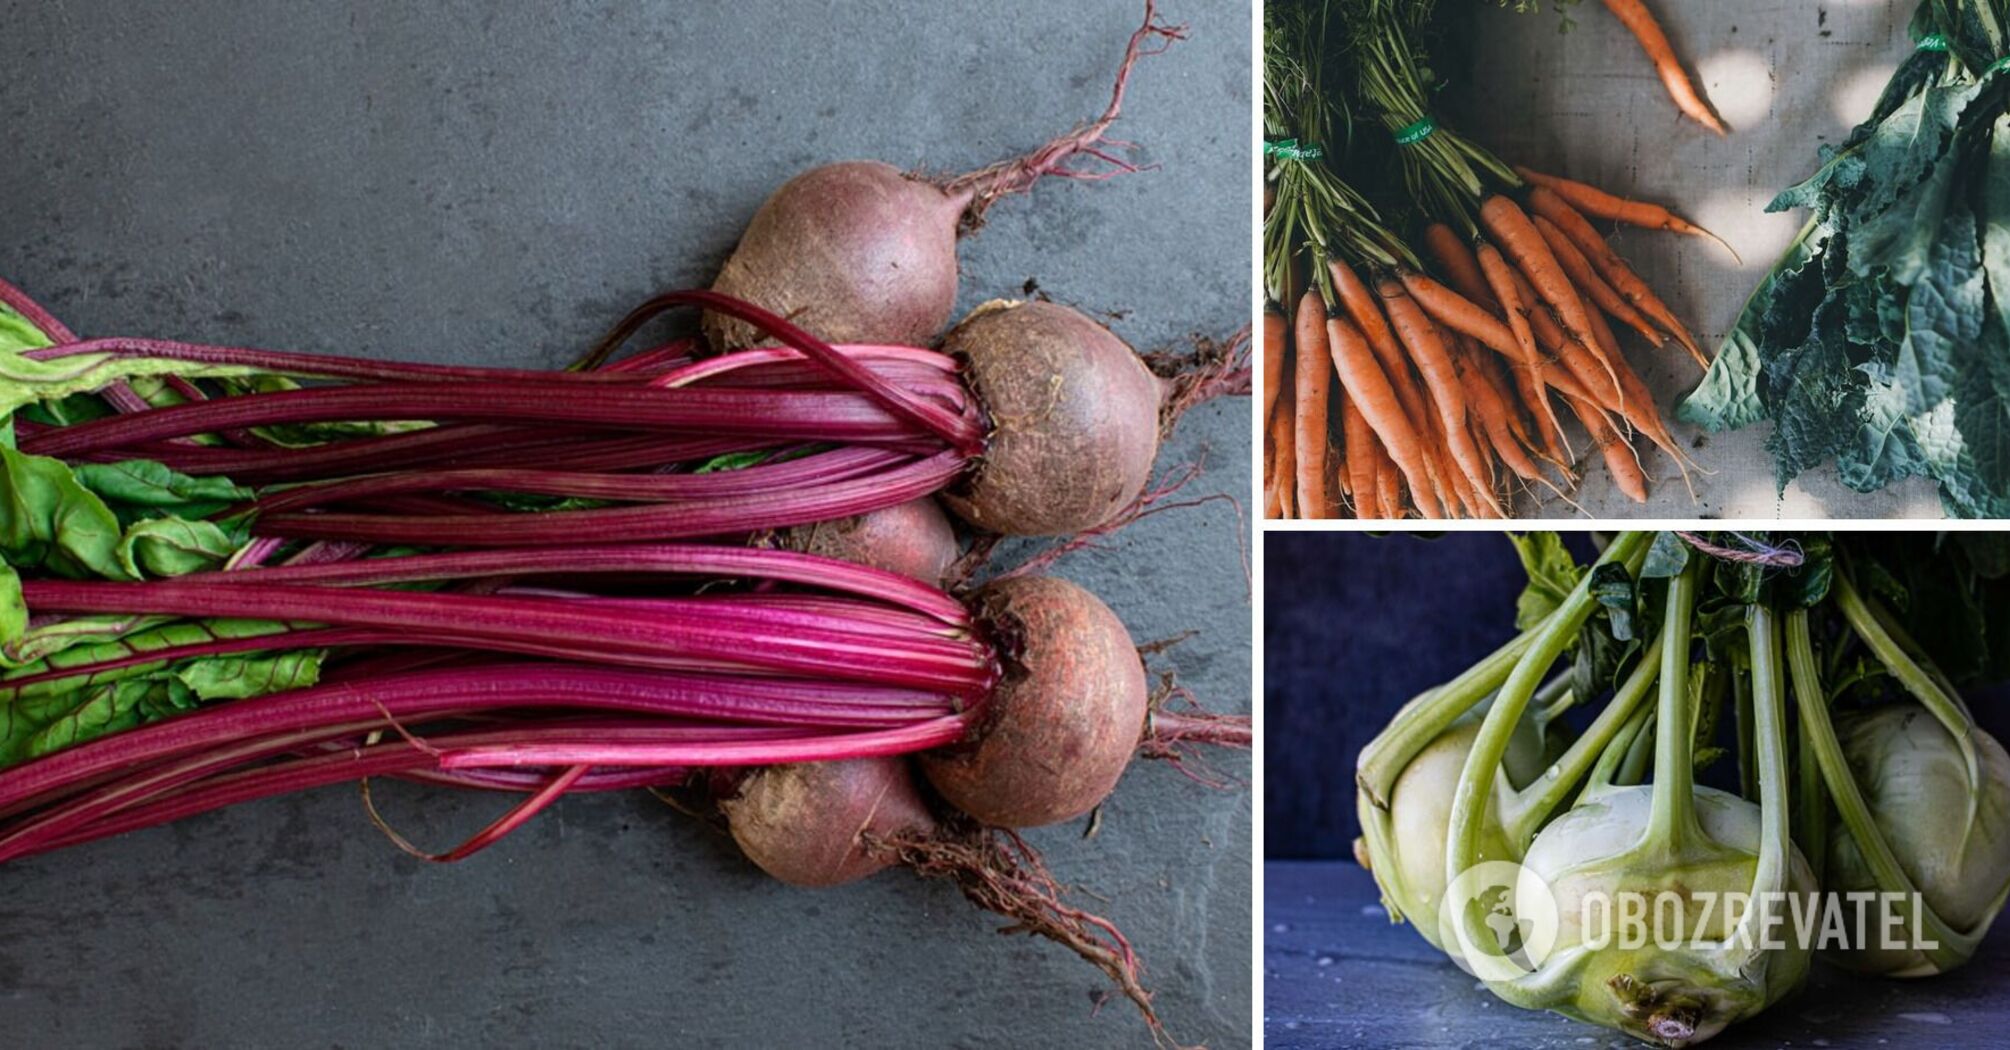 The most underrated vegetables rich in vitamins and minerals have been named